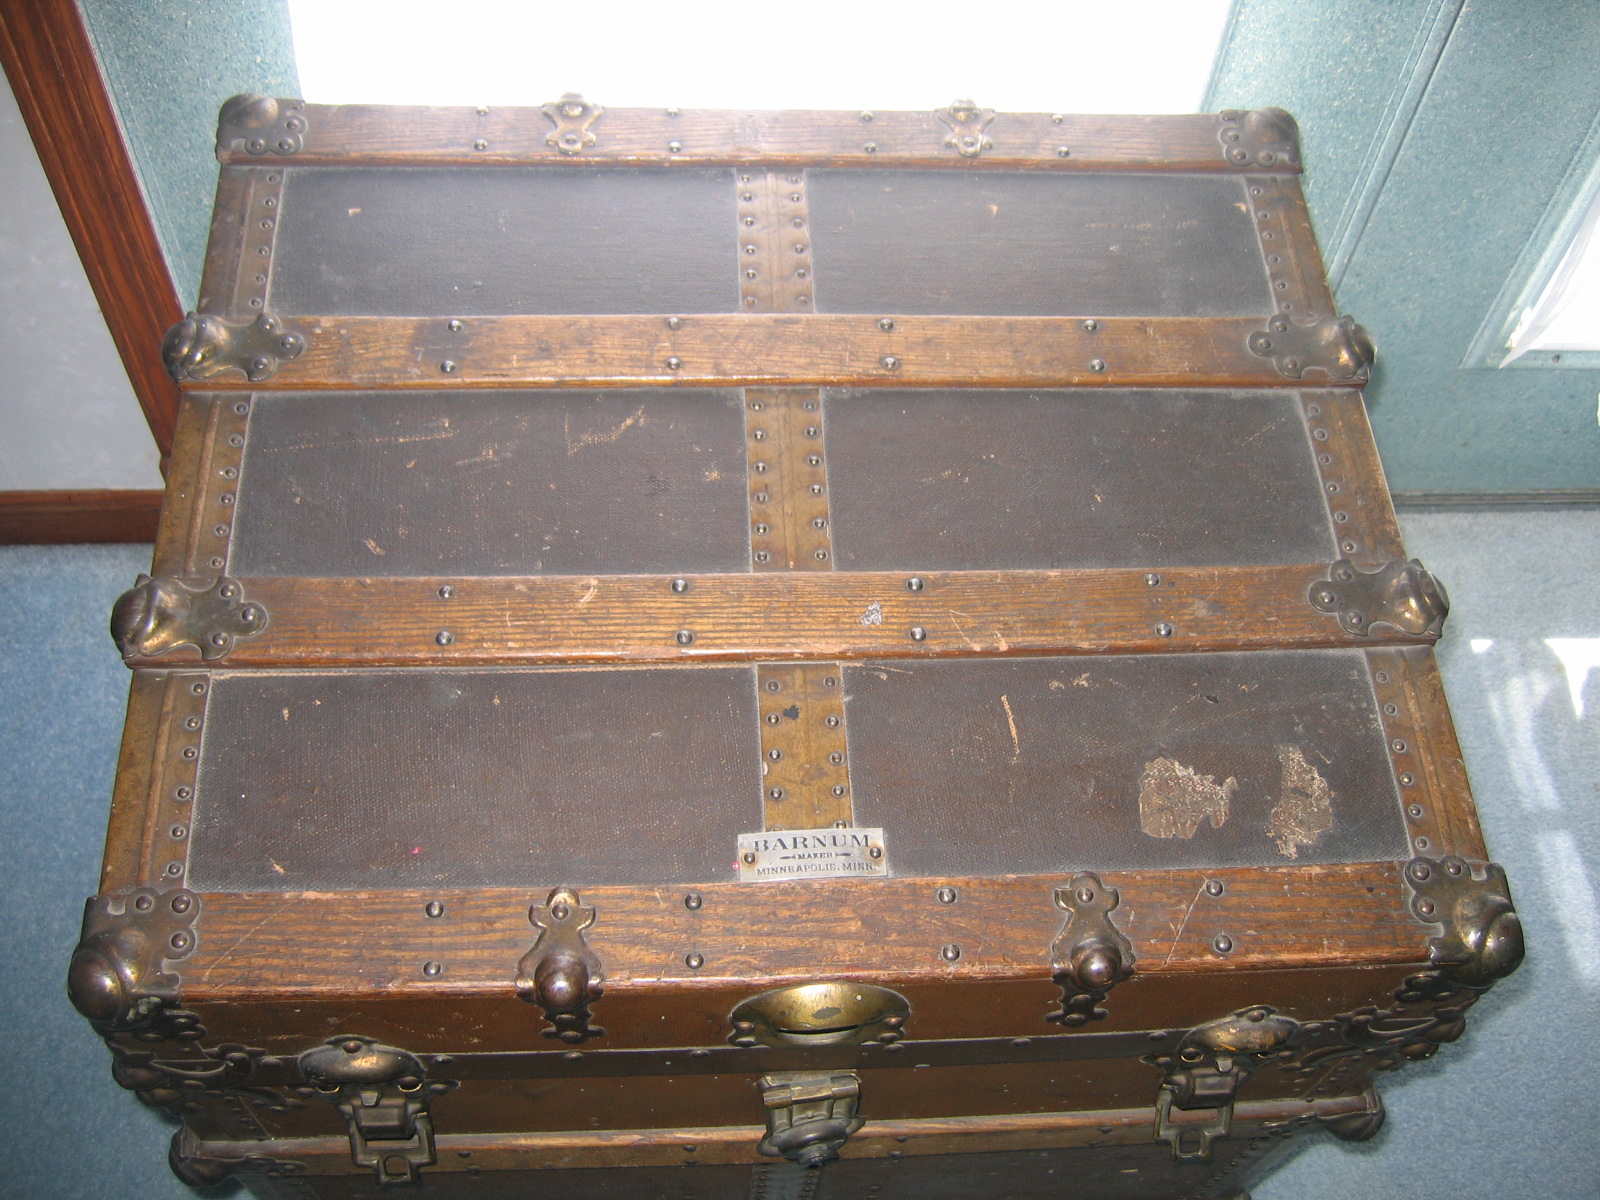 Antique Wooden Chest Travel Storage Trunk Item #305 For Sale | 0 | Classifieds